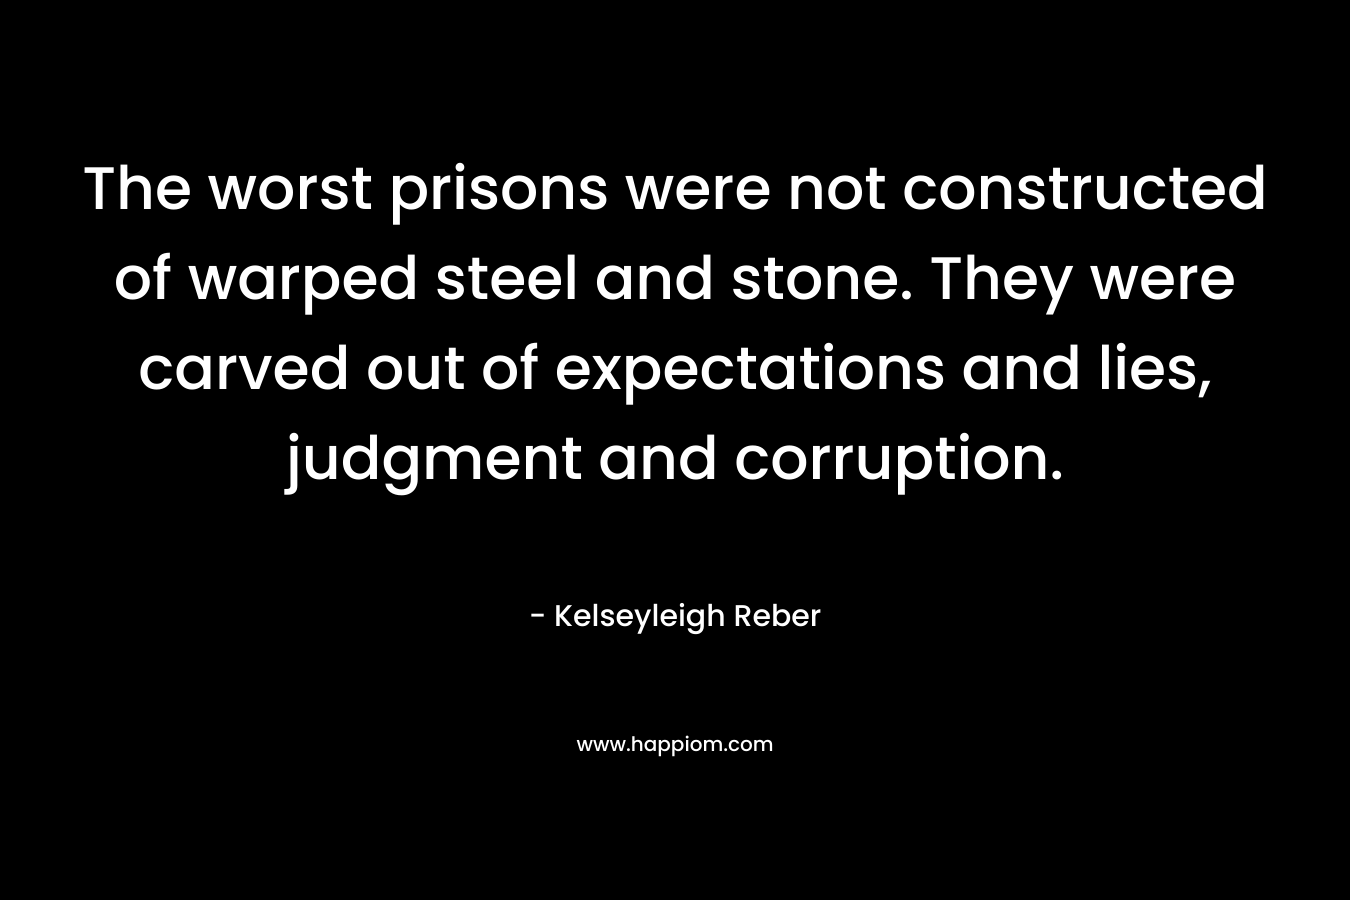 The worst prisons were not constructed of warped steel and stone. They were carved out of expectations and lies, judgment and corruption. – Kelseyleigh Reber